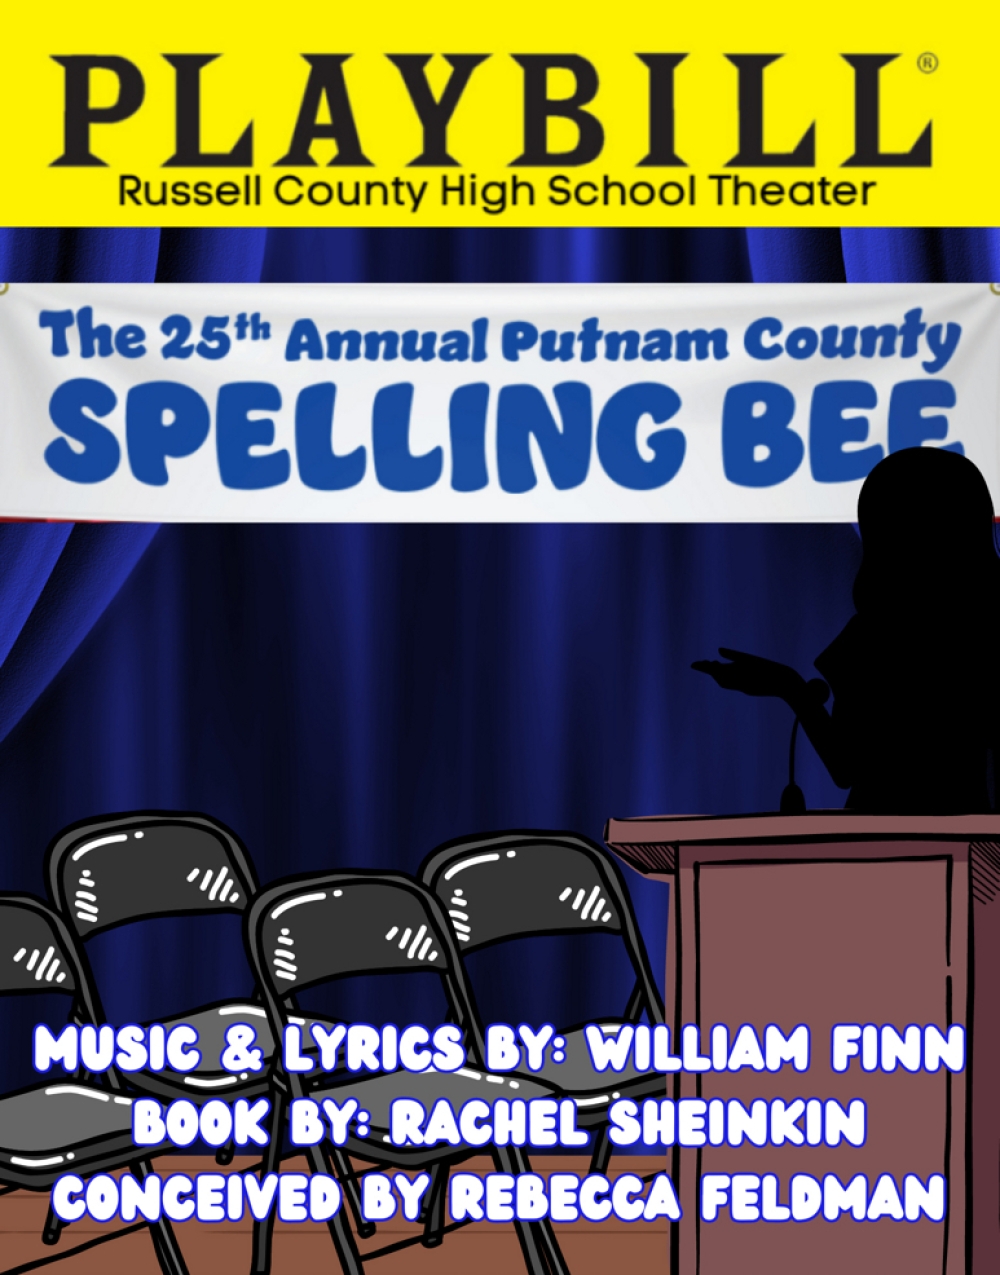 The 25th Annual Putnam County Spelling Bee at Russell County High School